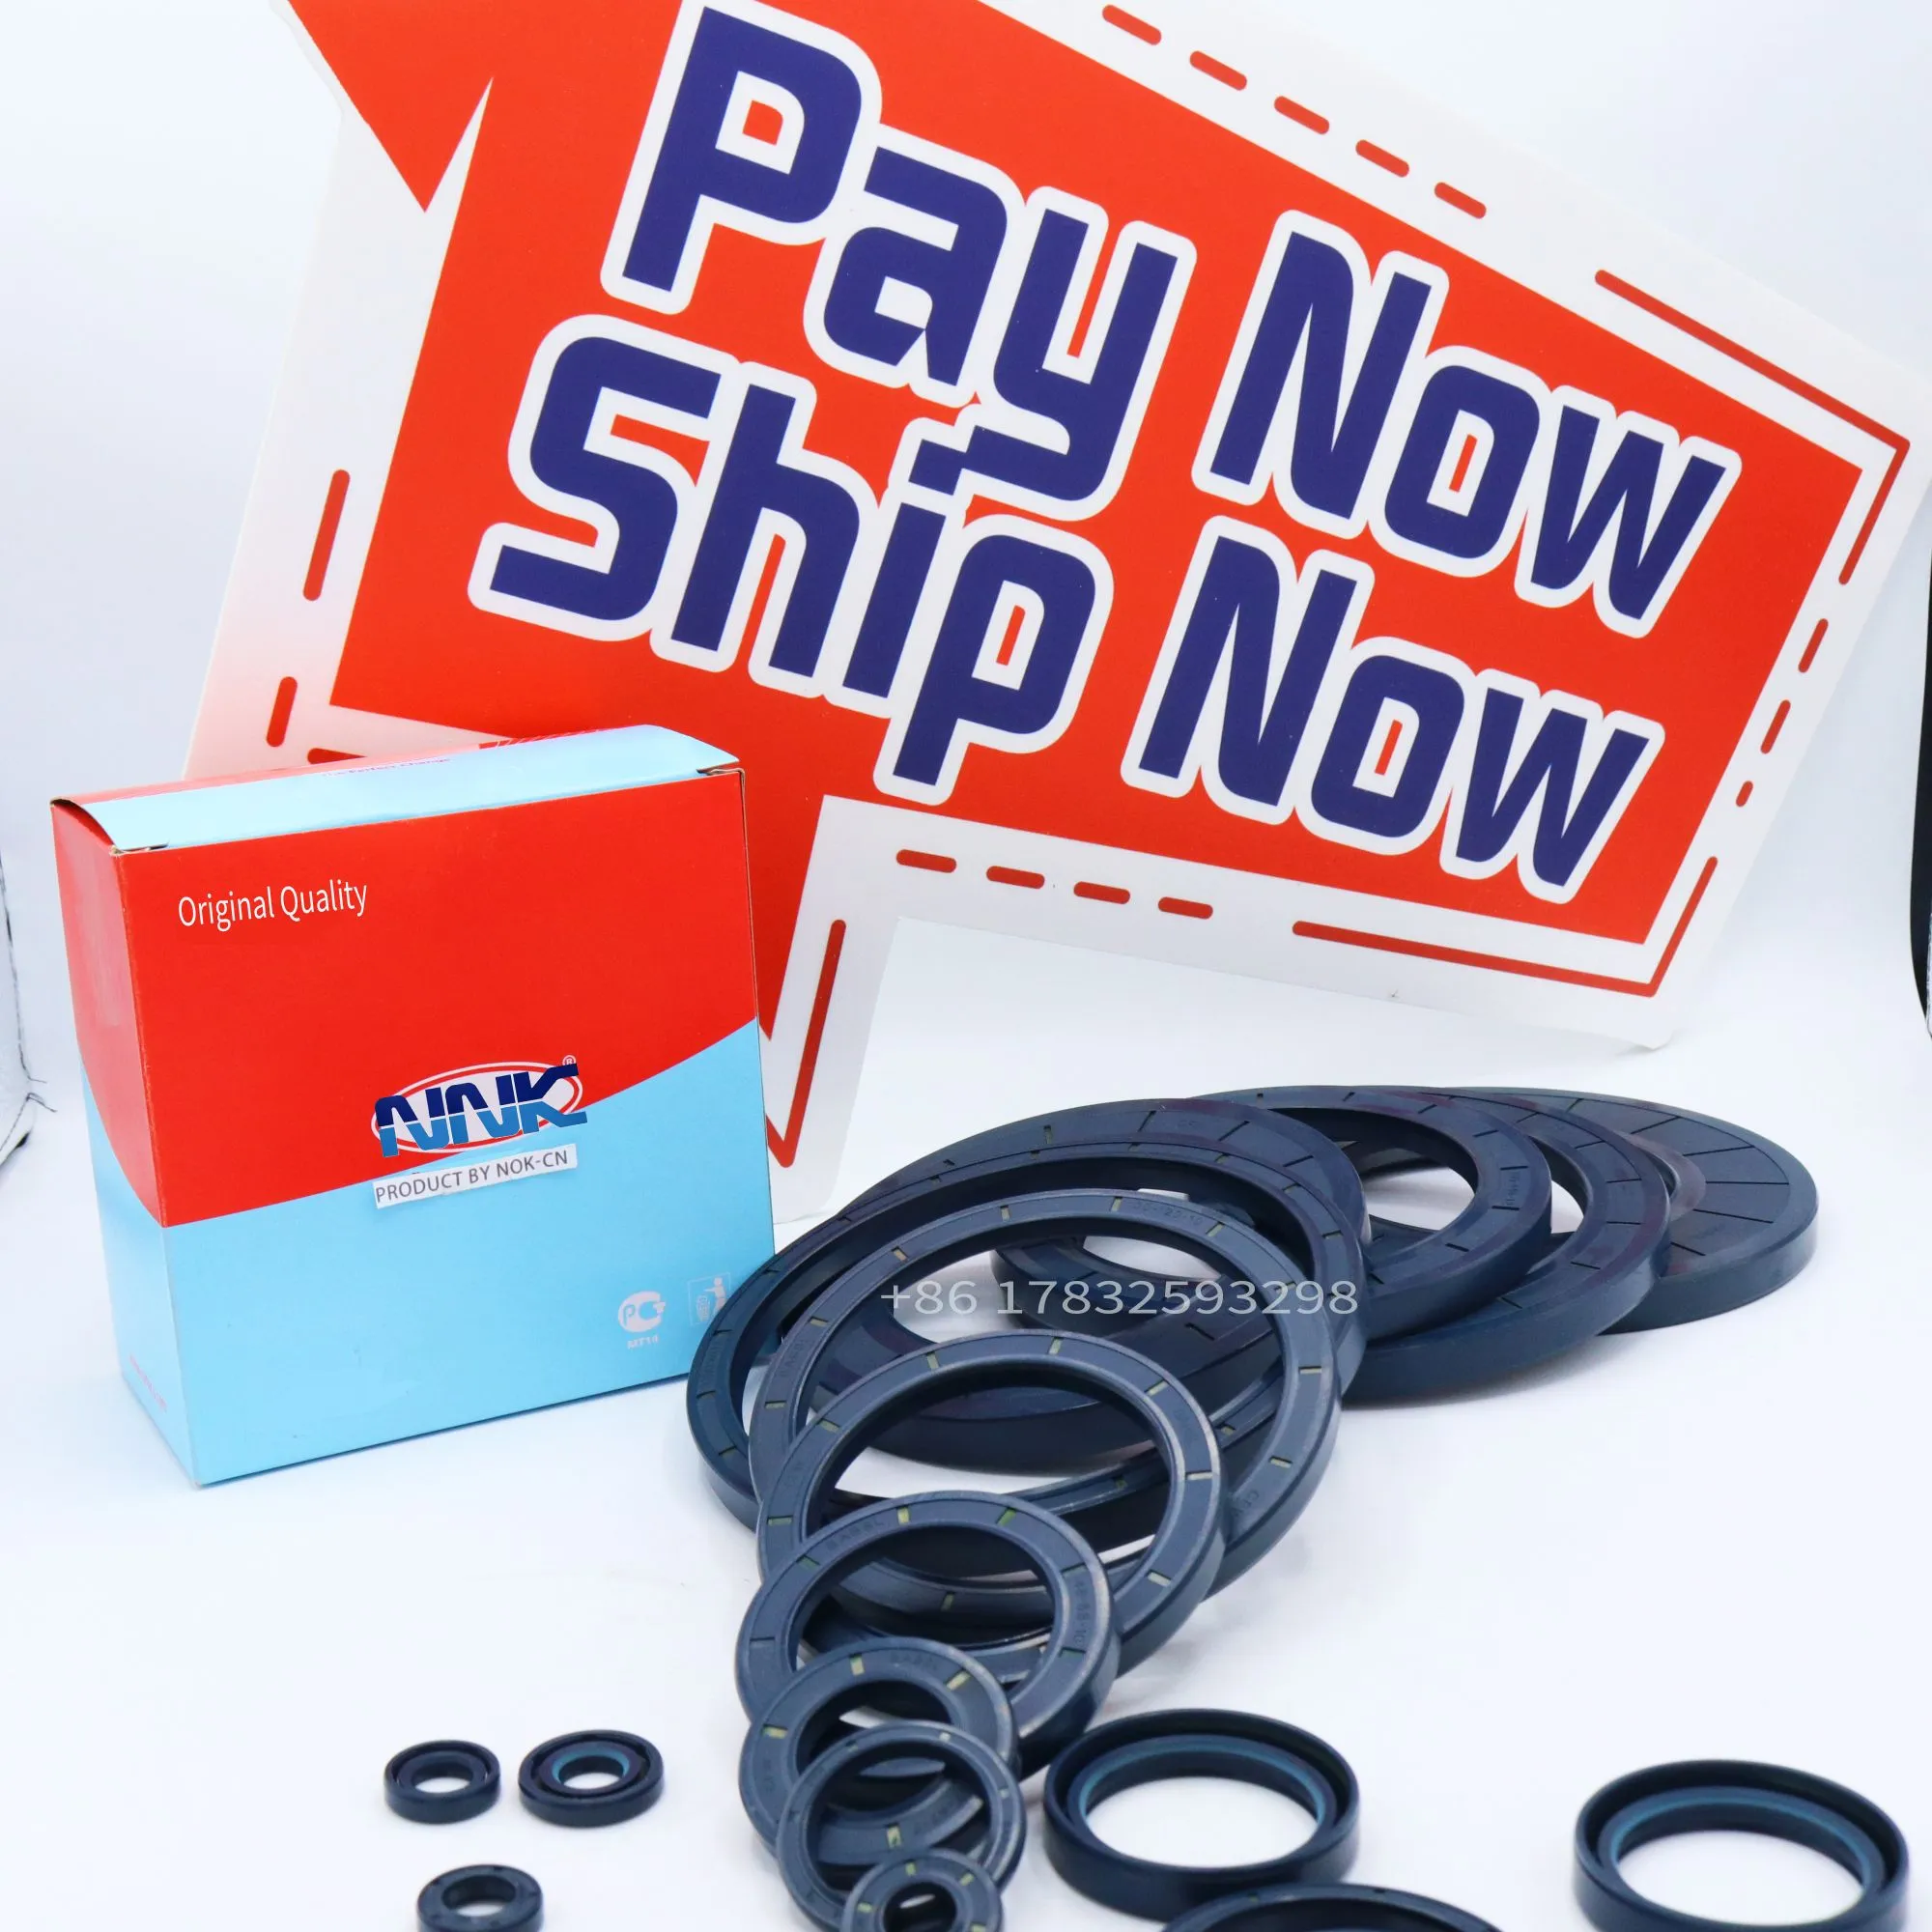 Where can I buy boom oil seals, hydraulic pump oil seals, oil cylinder seals, high quality high pressure oil seals?